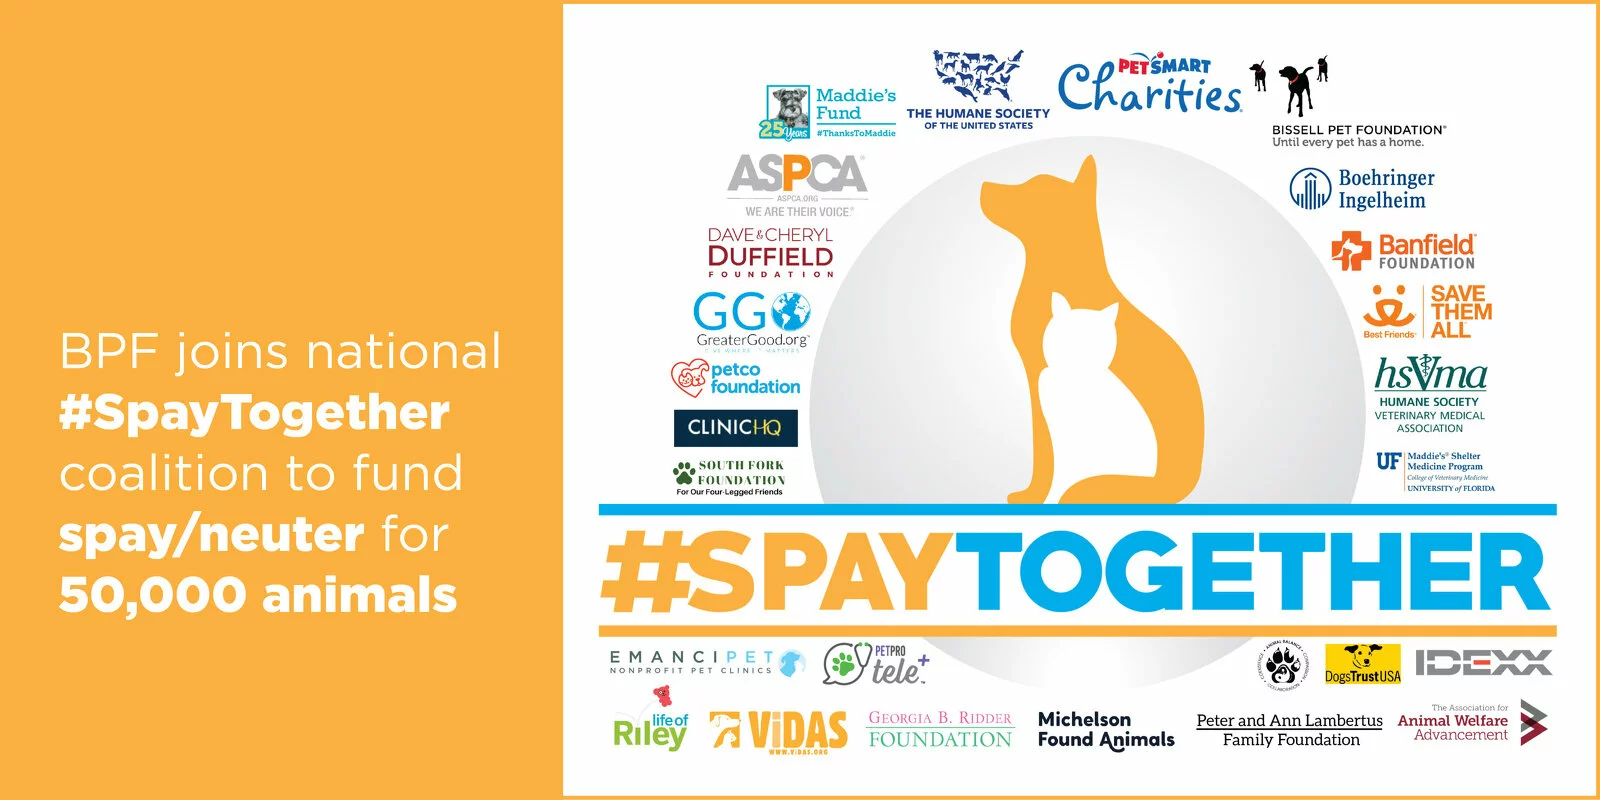 BPF Joins National #SpayTogether Coalition to Fund Spay/Neuter for 50,000  Animals - BISSELL Pet Foundation